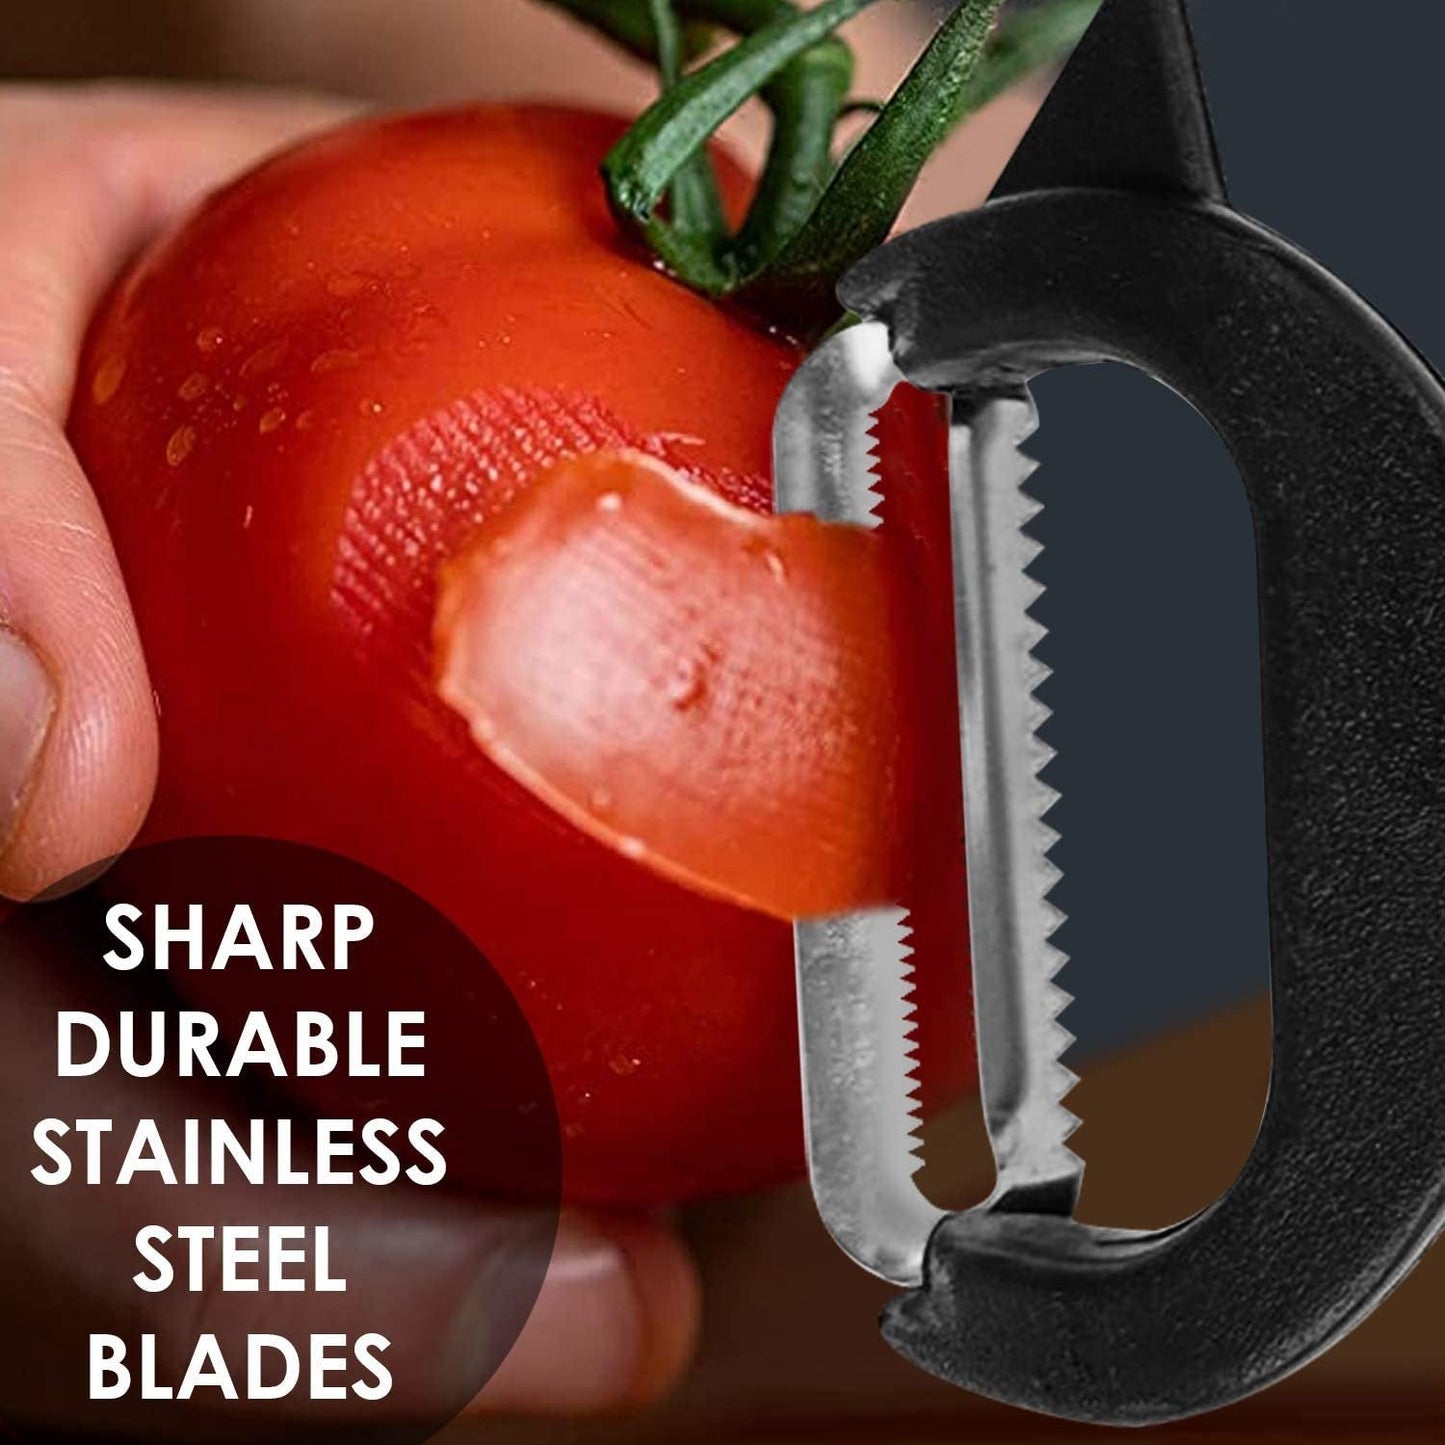 2-in-1 Double Julienne and Vegetable Peeler